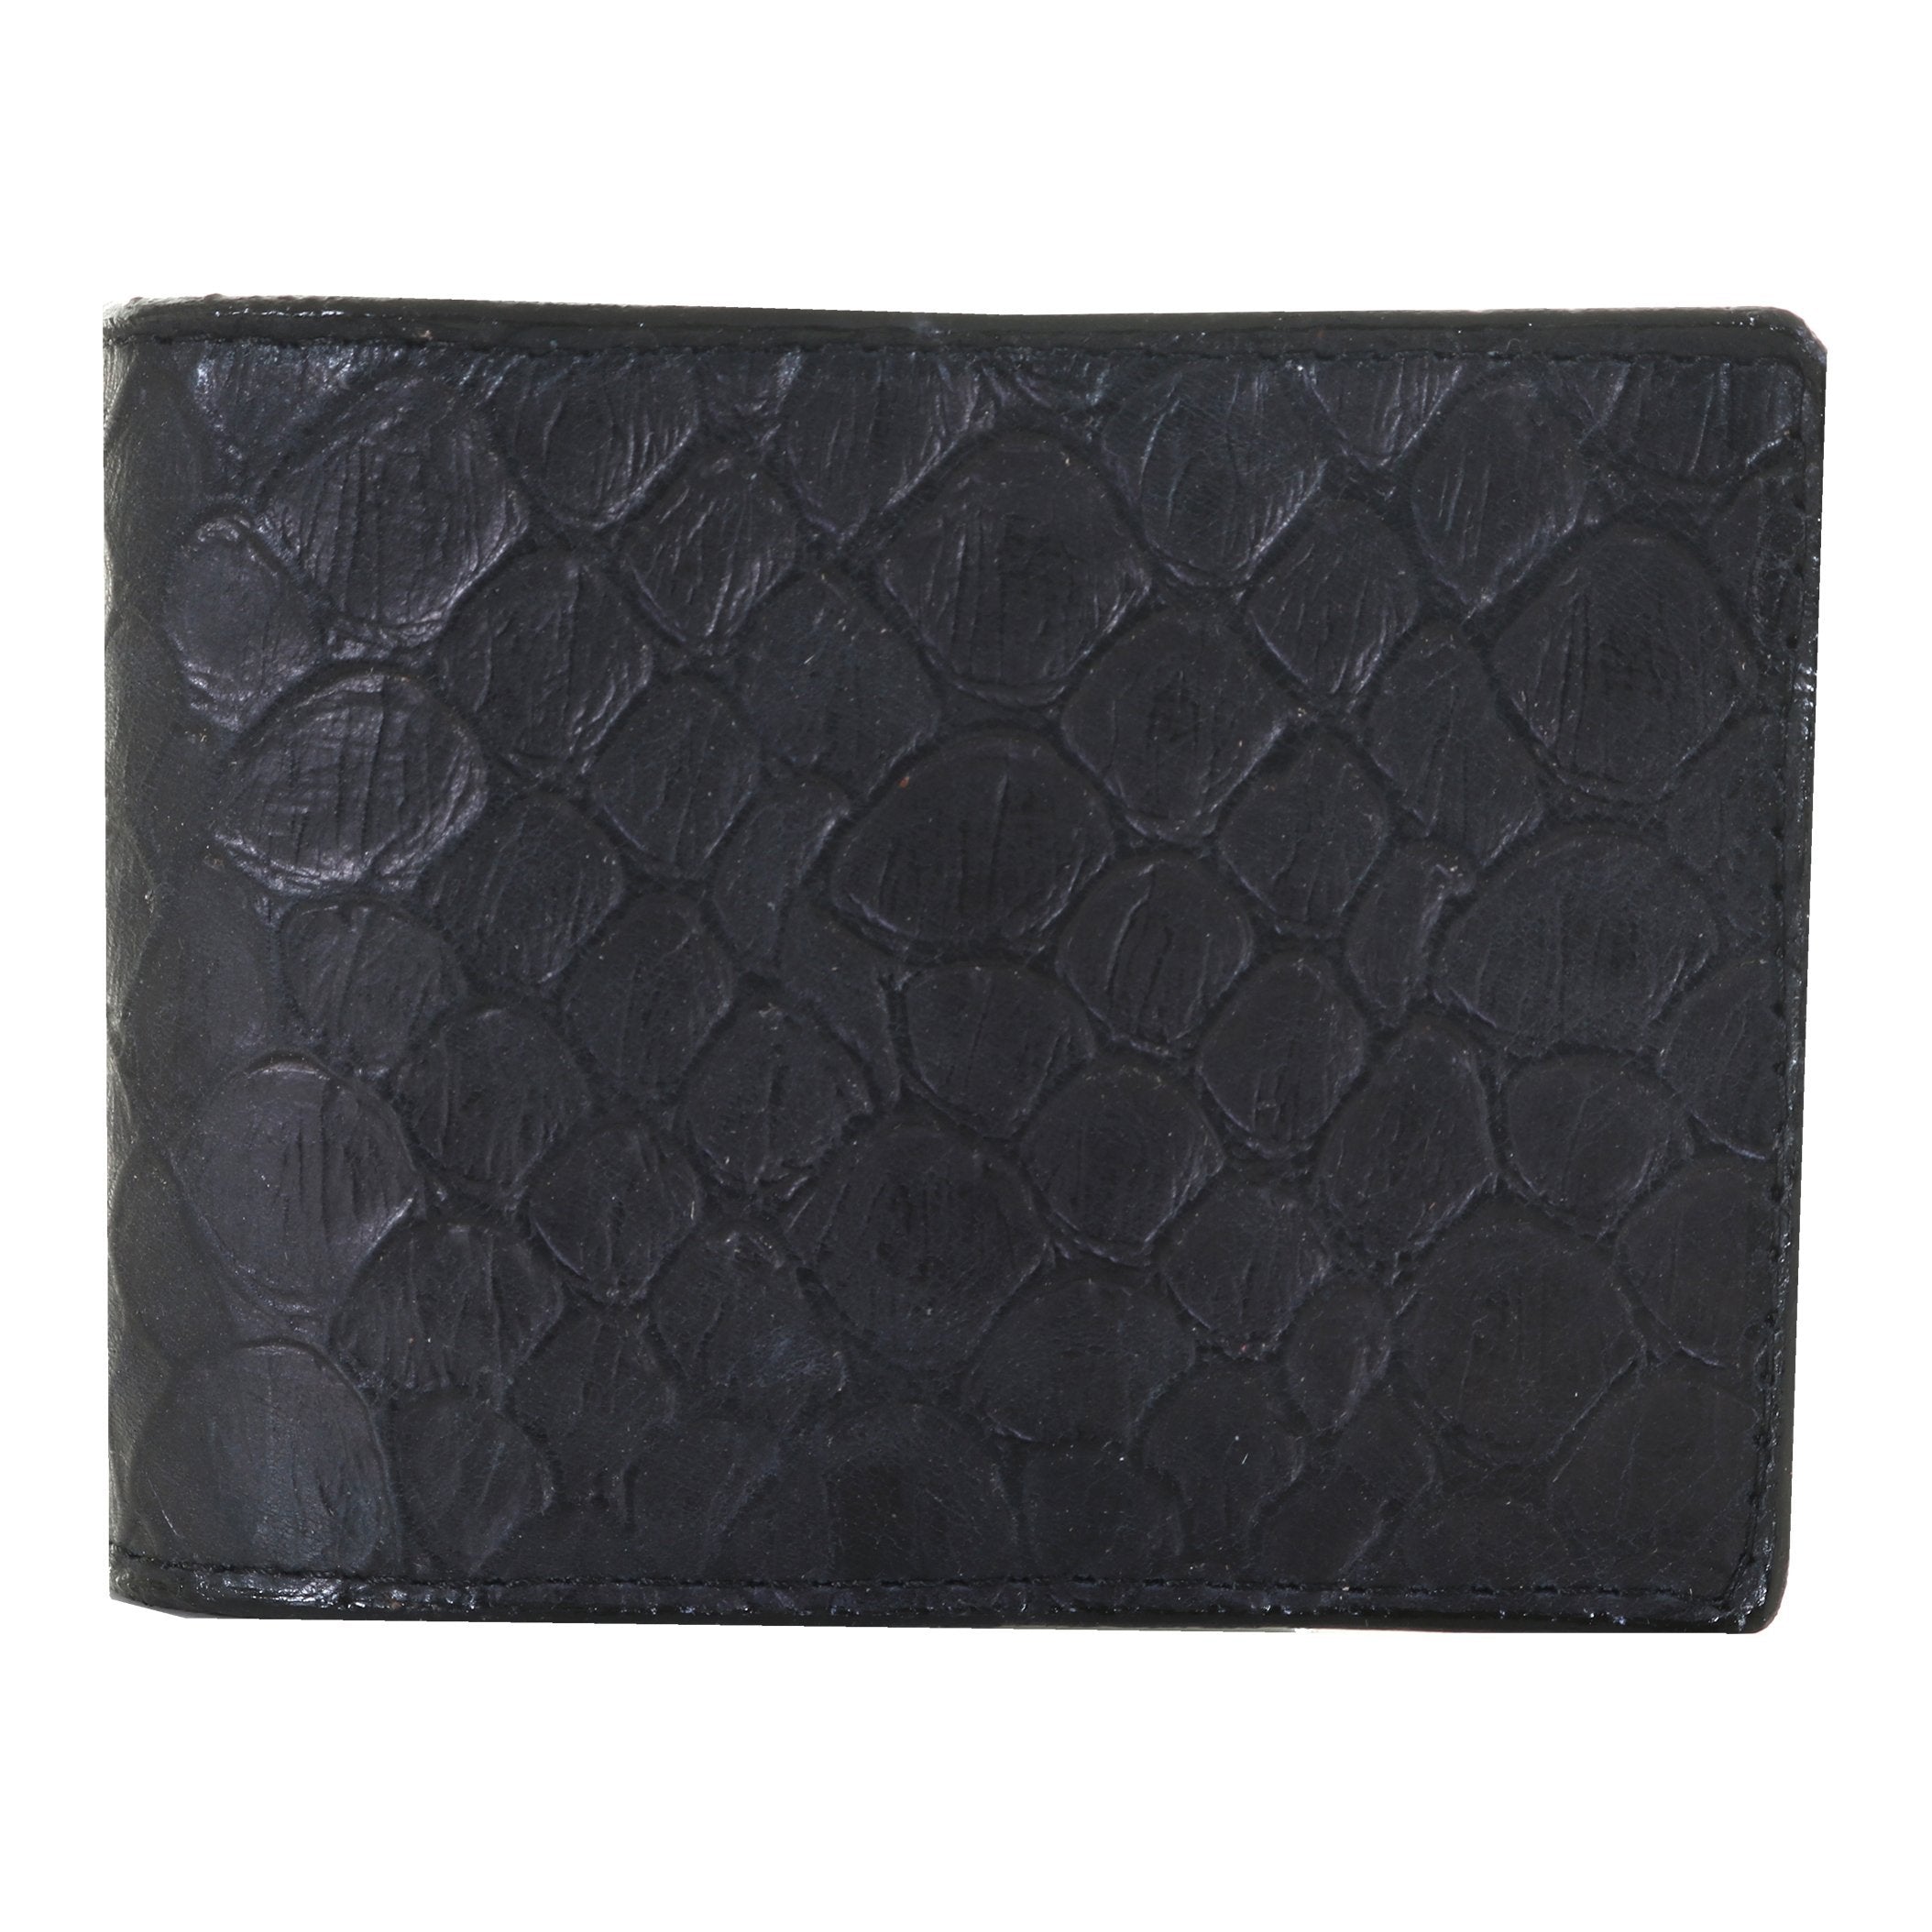 BF55 - Black African Fish Scale Print Bifold Wallet - Double J Saddlery